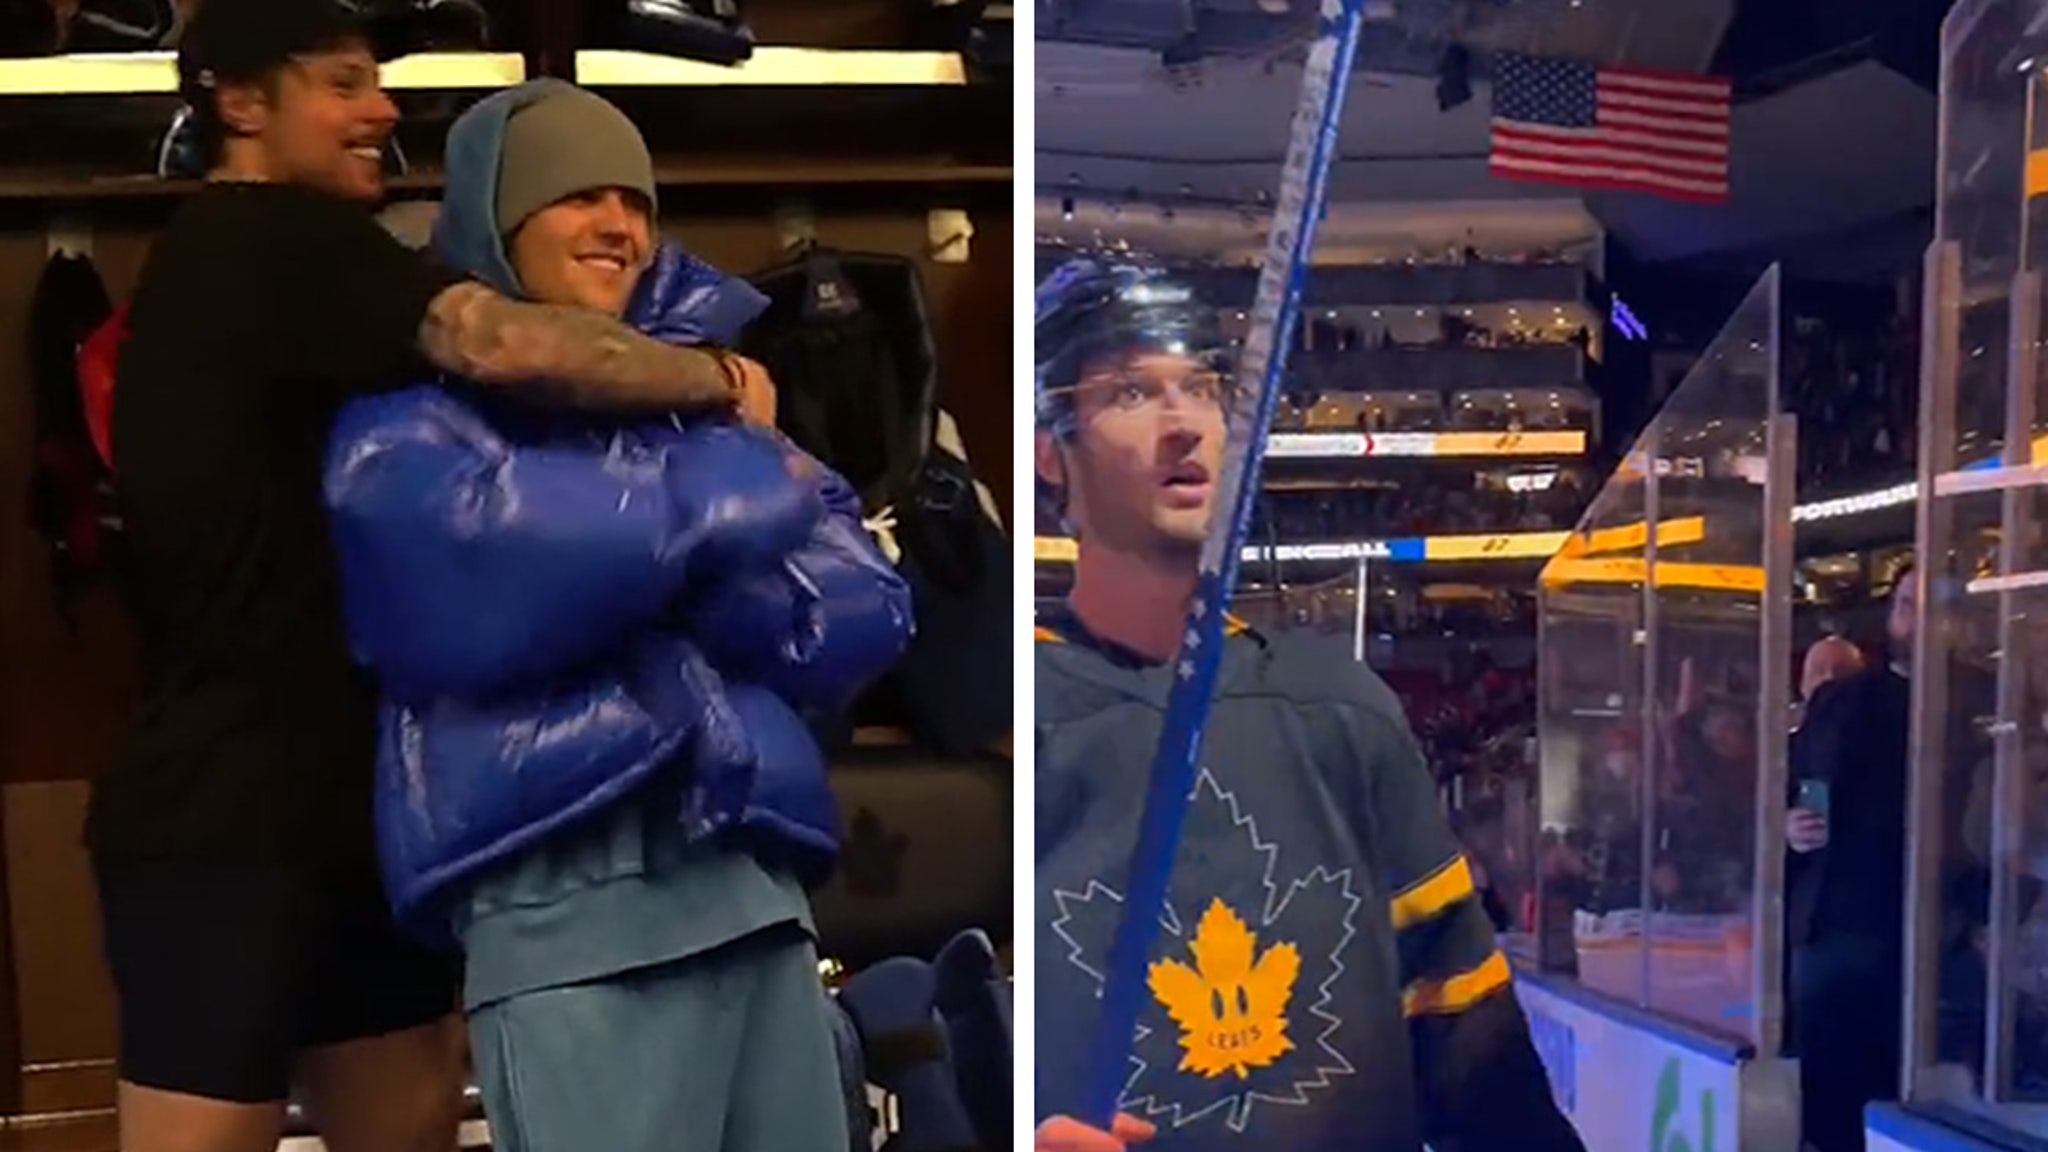 Justin Bieber crashed the Leafs' dressing room party (VIDEO)